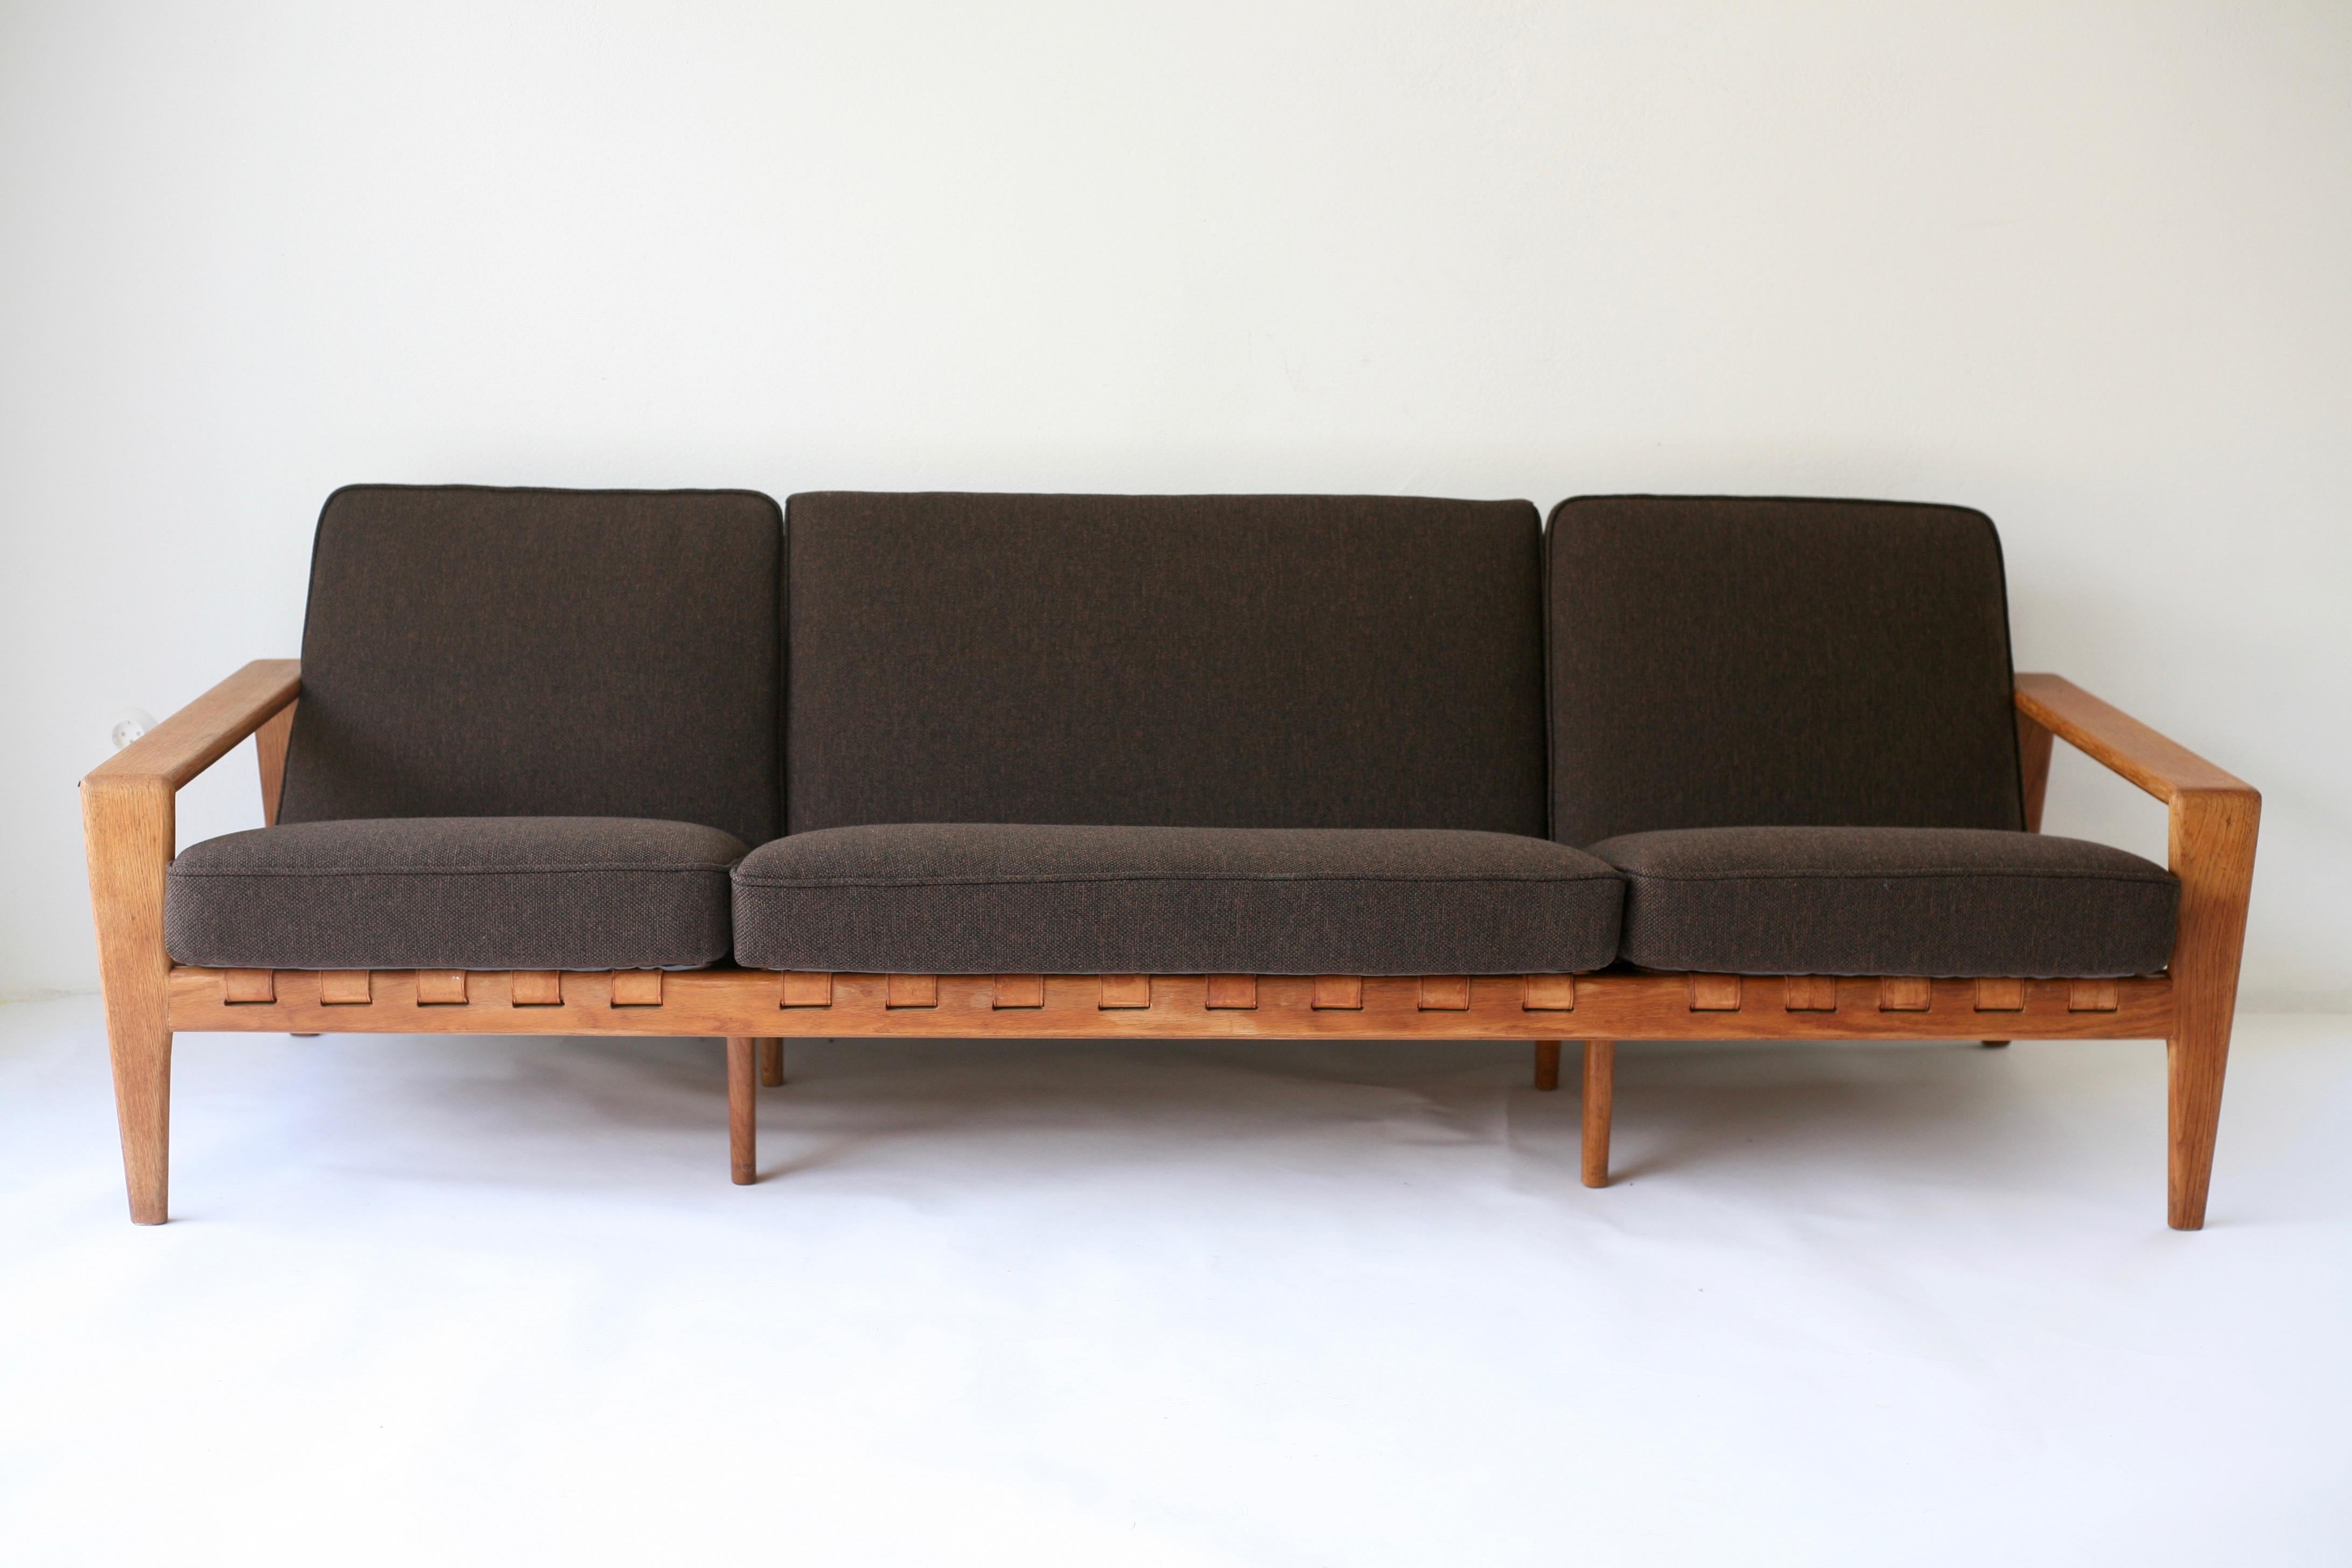 Cool sofa “Bodö” in oak with leather webbing. Brutal design done in 1957 by Svante Skogh for Säffle möbler. This sofa manufactured by Bodafors. Due to tye length of the sofa it has four supportive legs underneath, two to the front and two to the